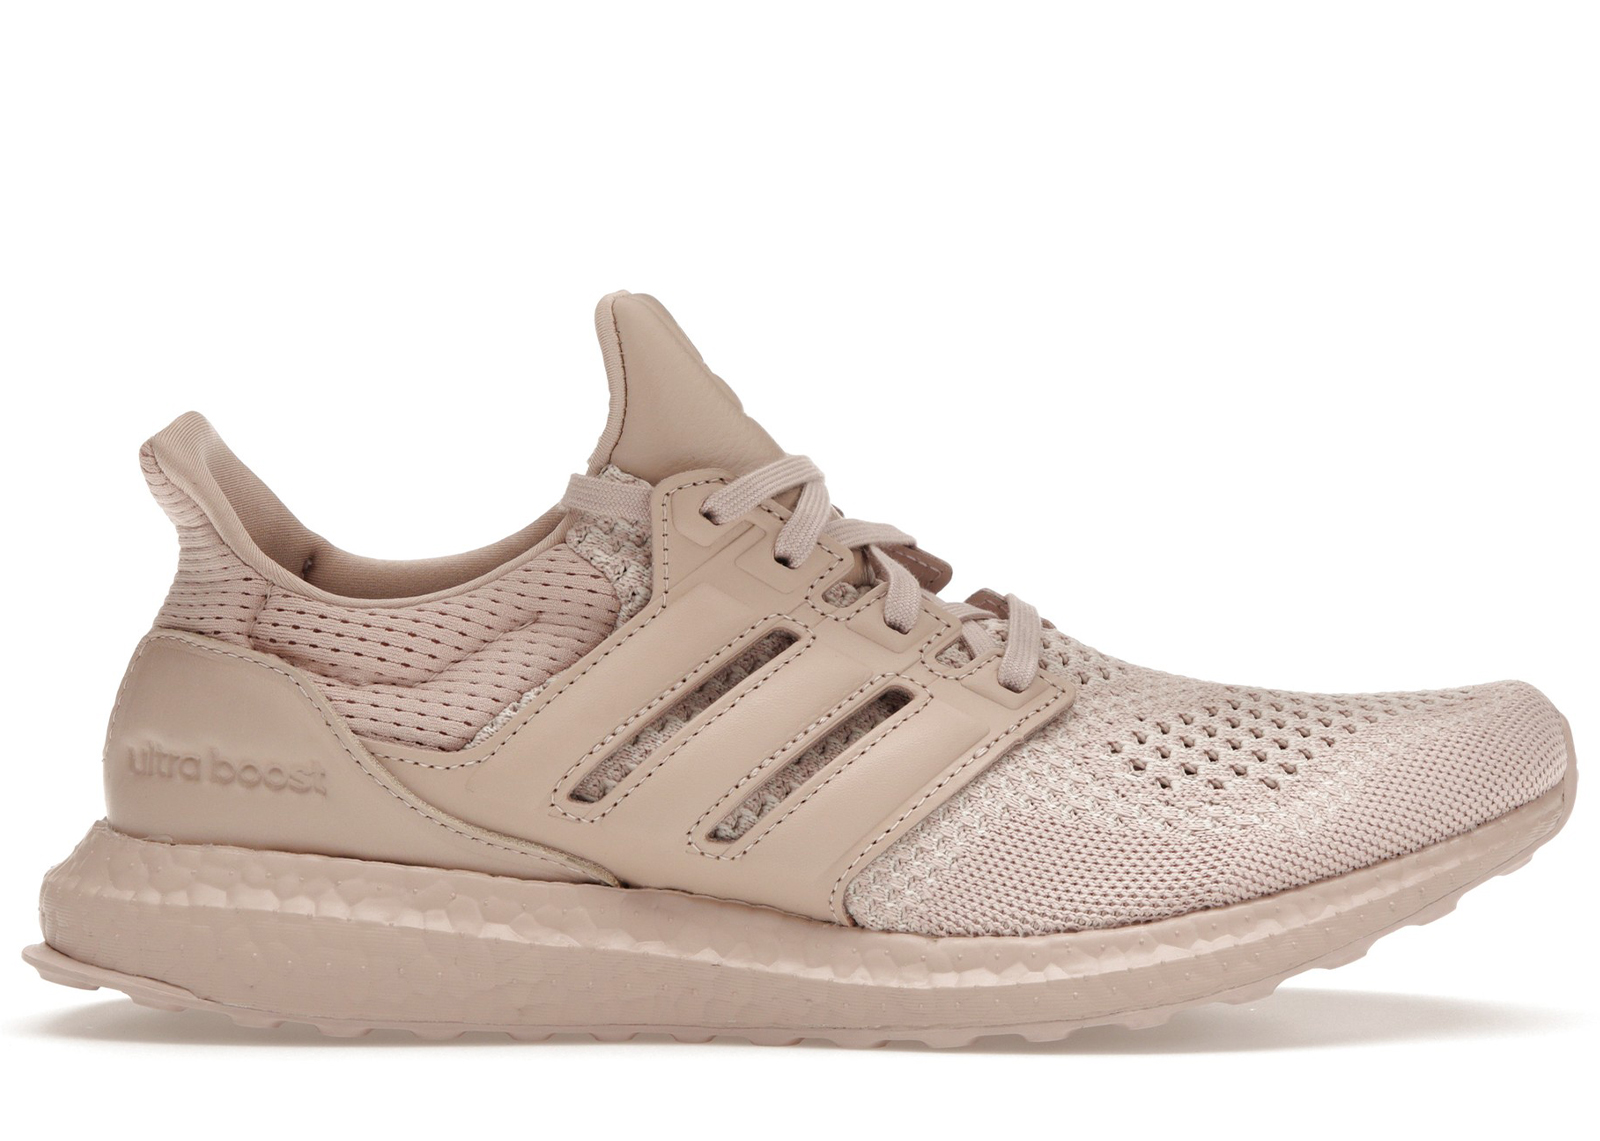 adidas Ultra Boost 1.0 DNA White Gum Camo Sole - GY9135 - US